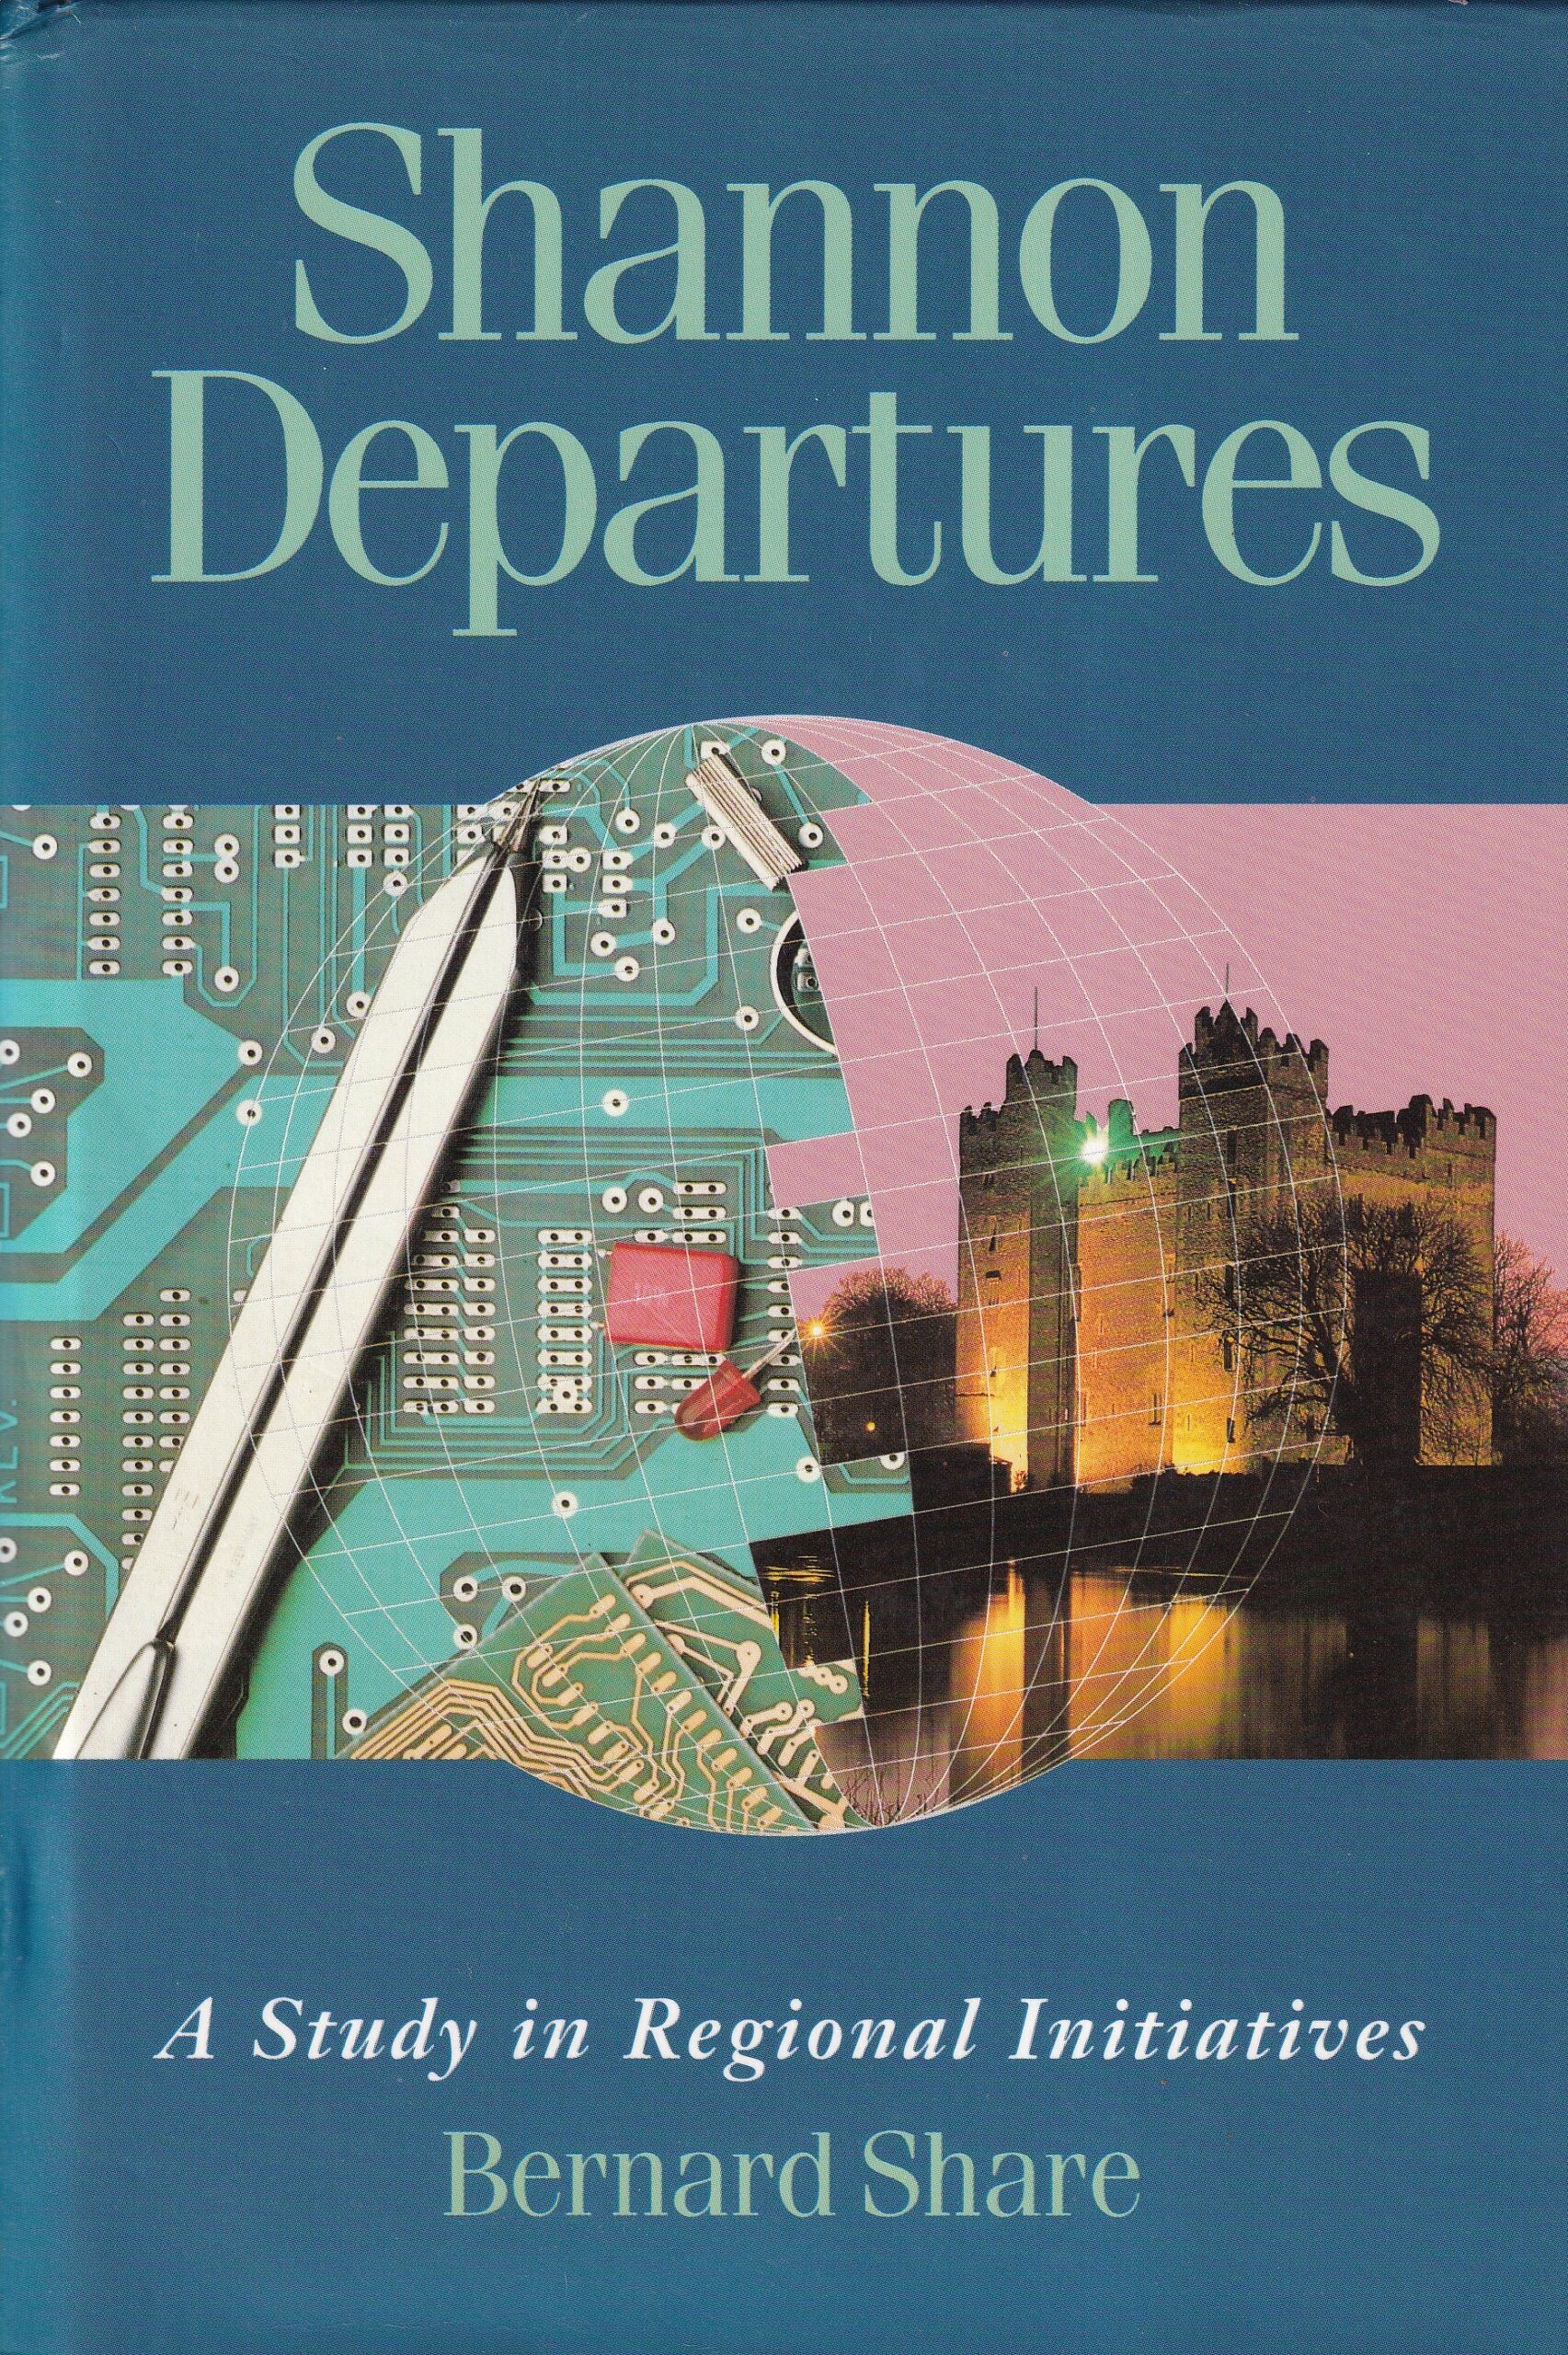 Shannon Departures: A Study in Regional Initiatives by Bernard Share